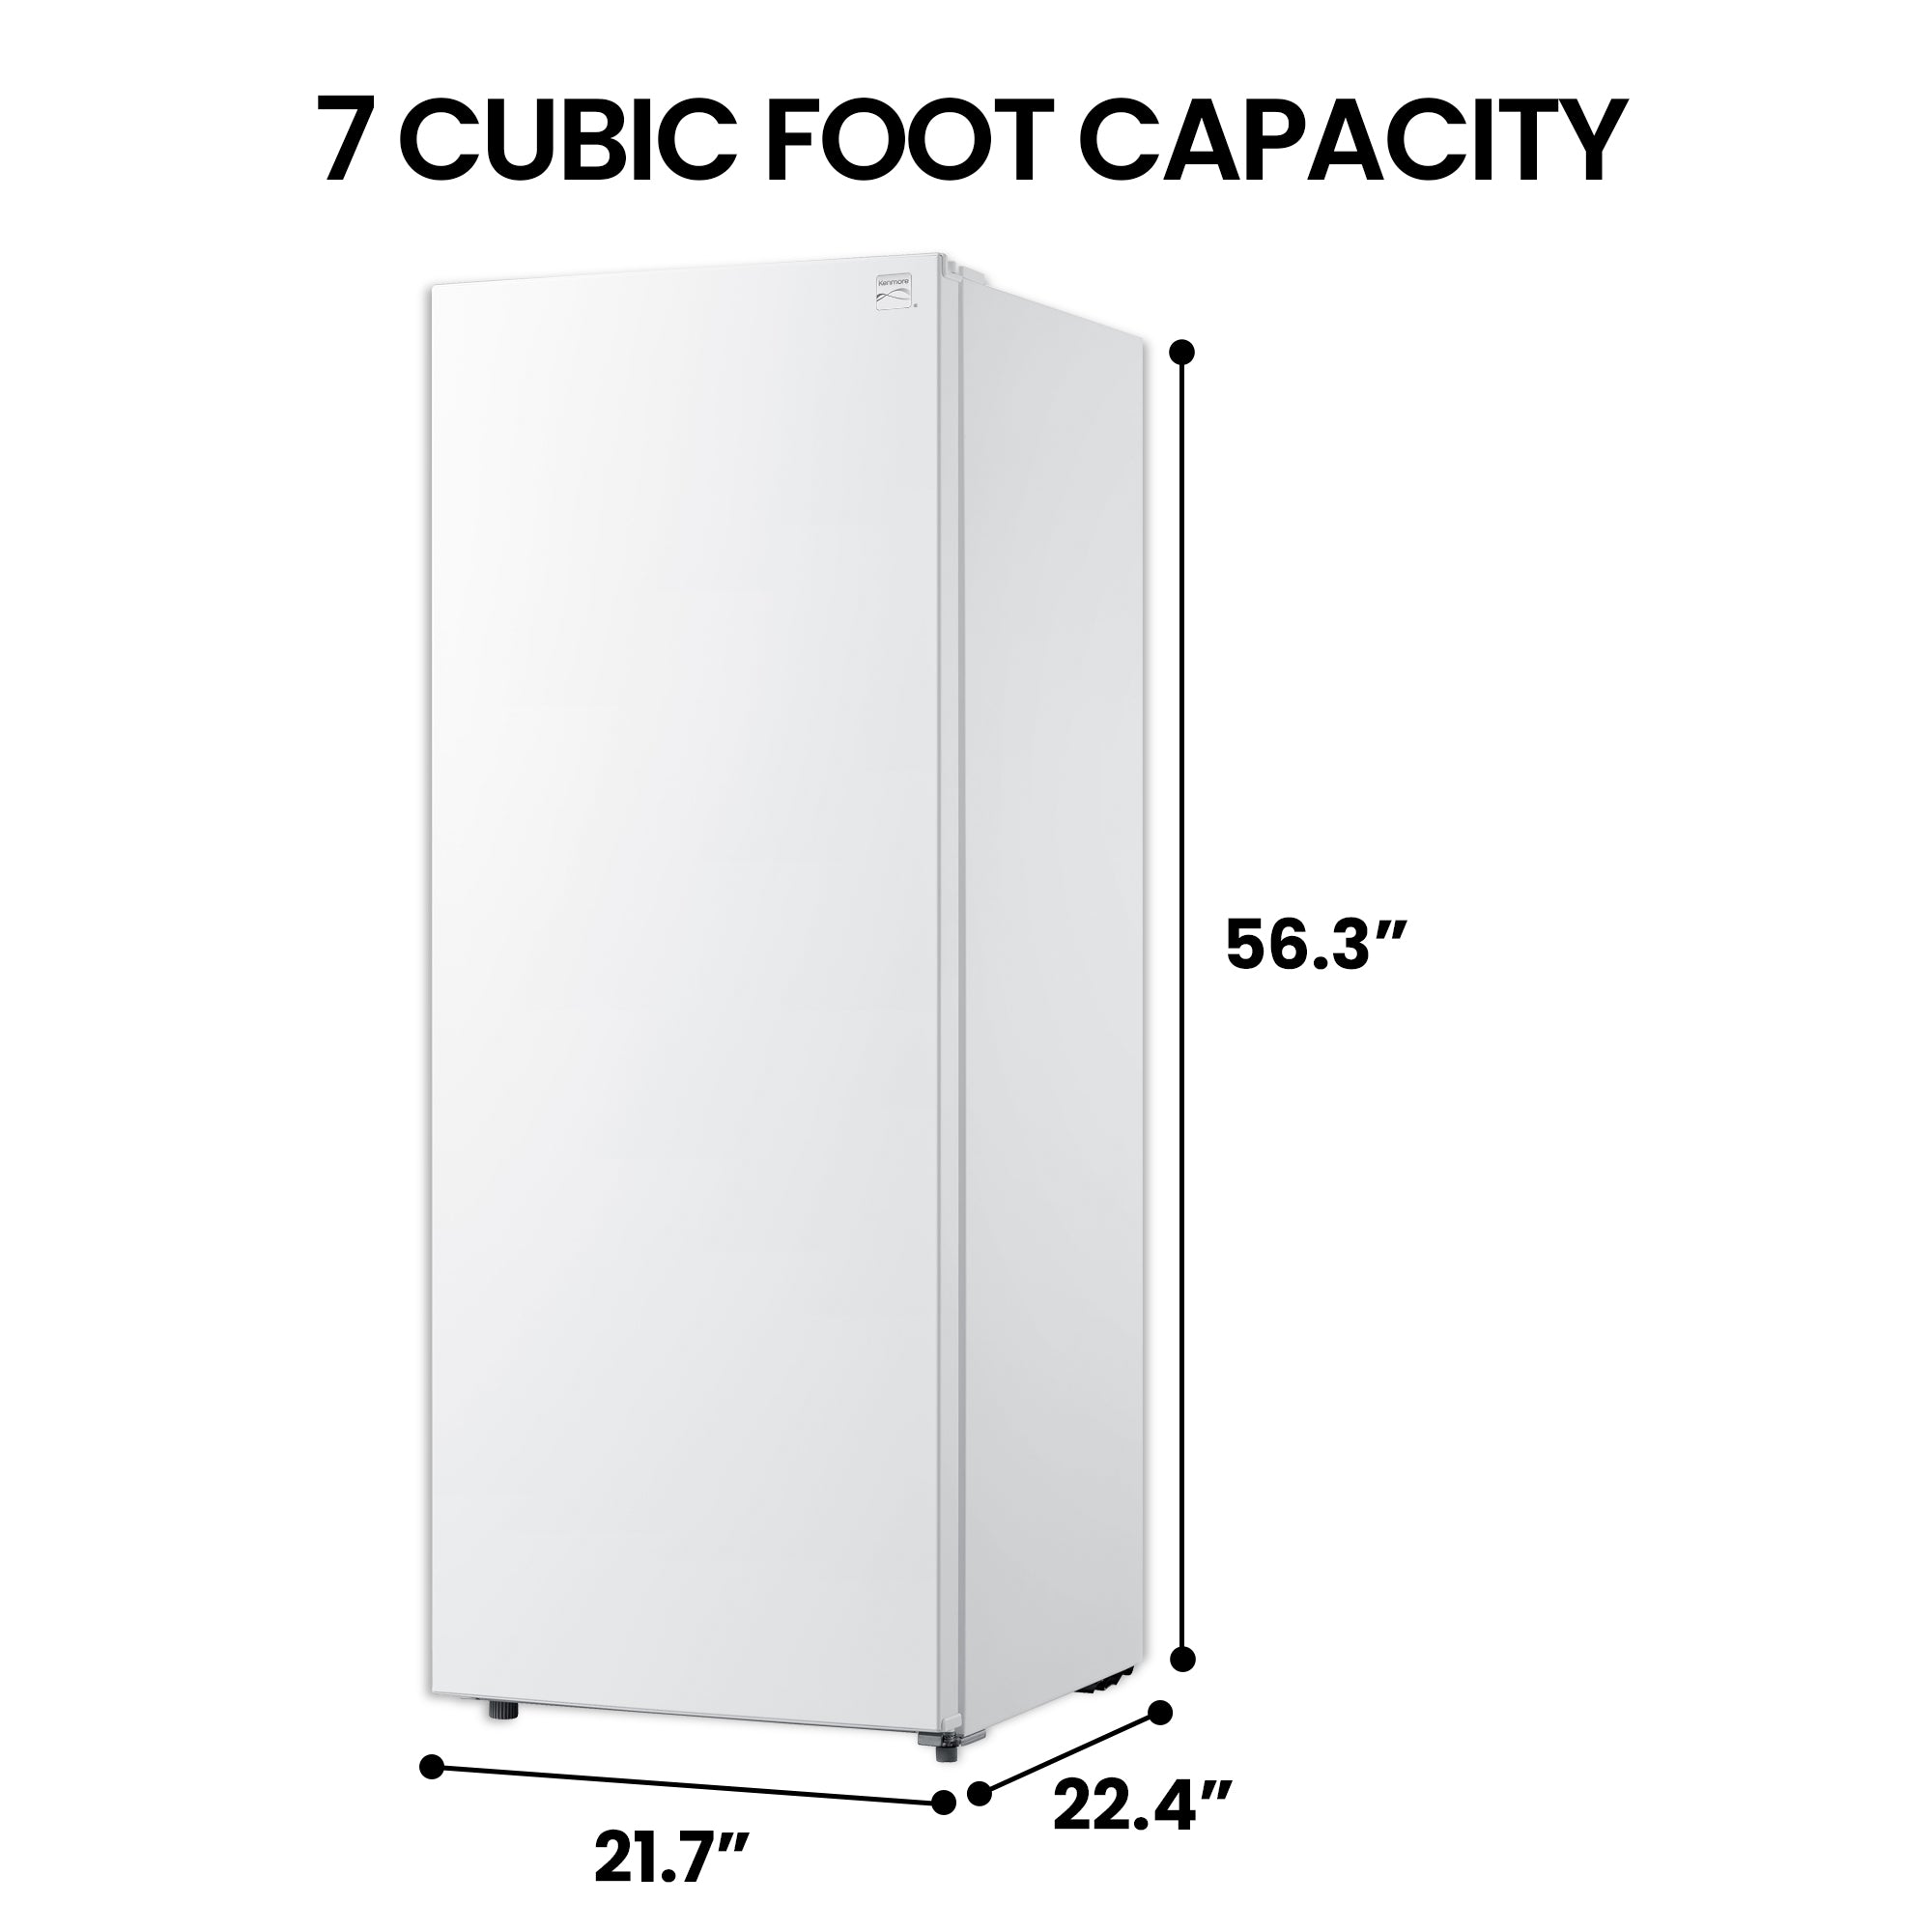 Kenmore upright convertible freezer on a white background with dimensions labeled and text above reading, "7 cubic foot capacity"